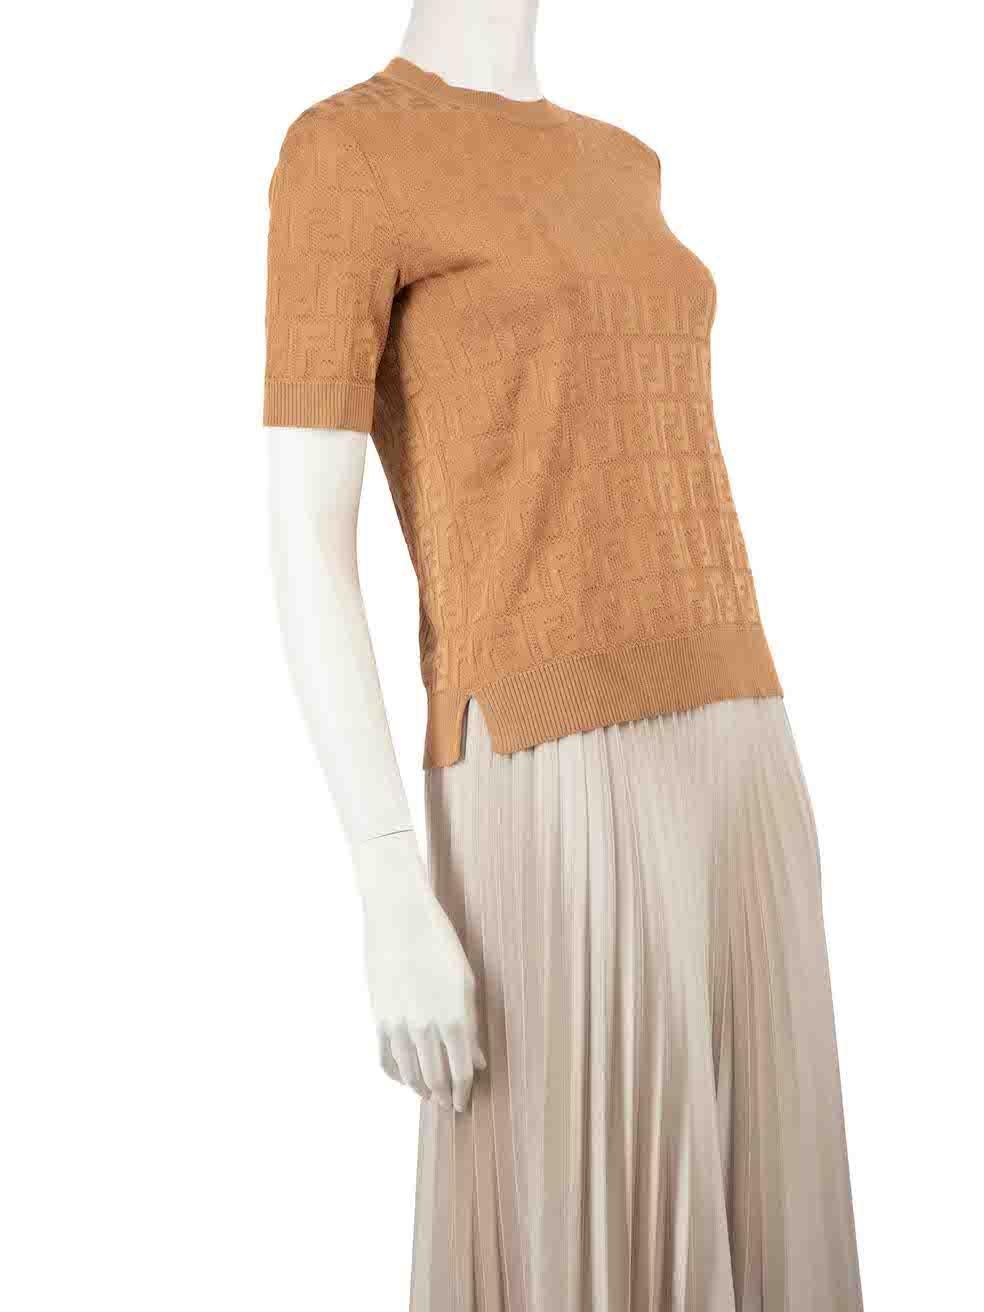 CONDITION is Very good. Hardly any visible wear to top is evident on this used Fendi designer resale item.
 
 
 
 Details
 
 
 Brown
 
 Cotton
 
 Short sleeves top
 
 Round neckline
 
 FF zucca print pattern
 
 Ribbed knitted
 
 
 
 
 
 Made in